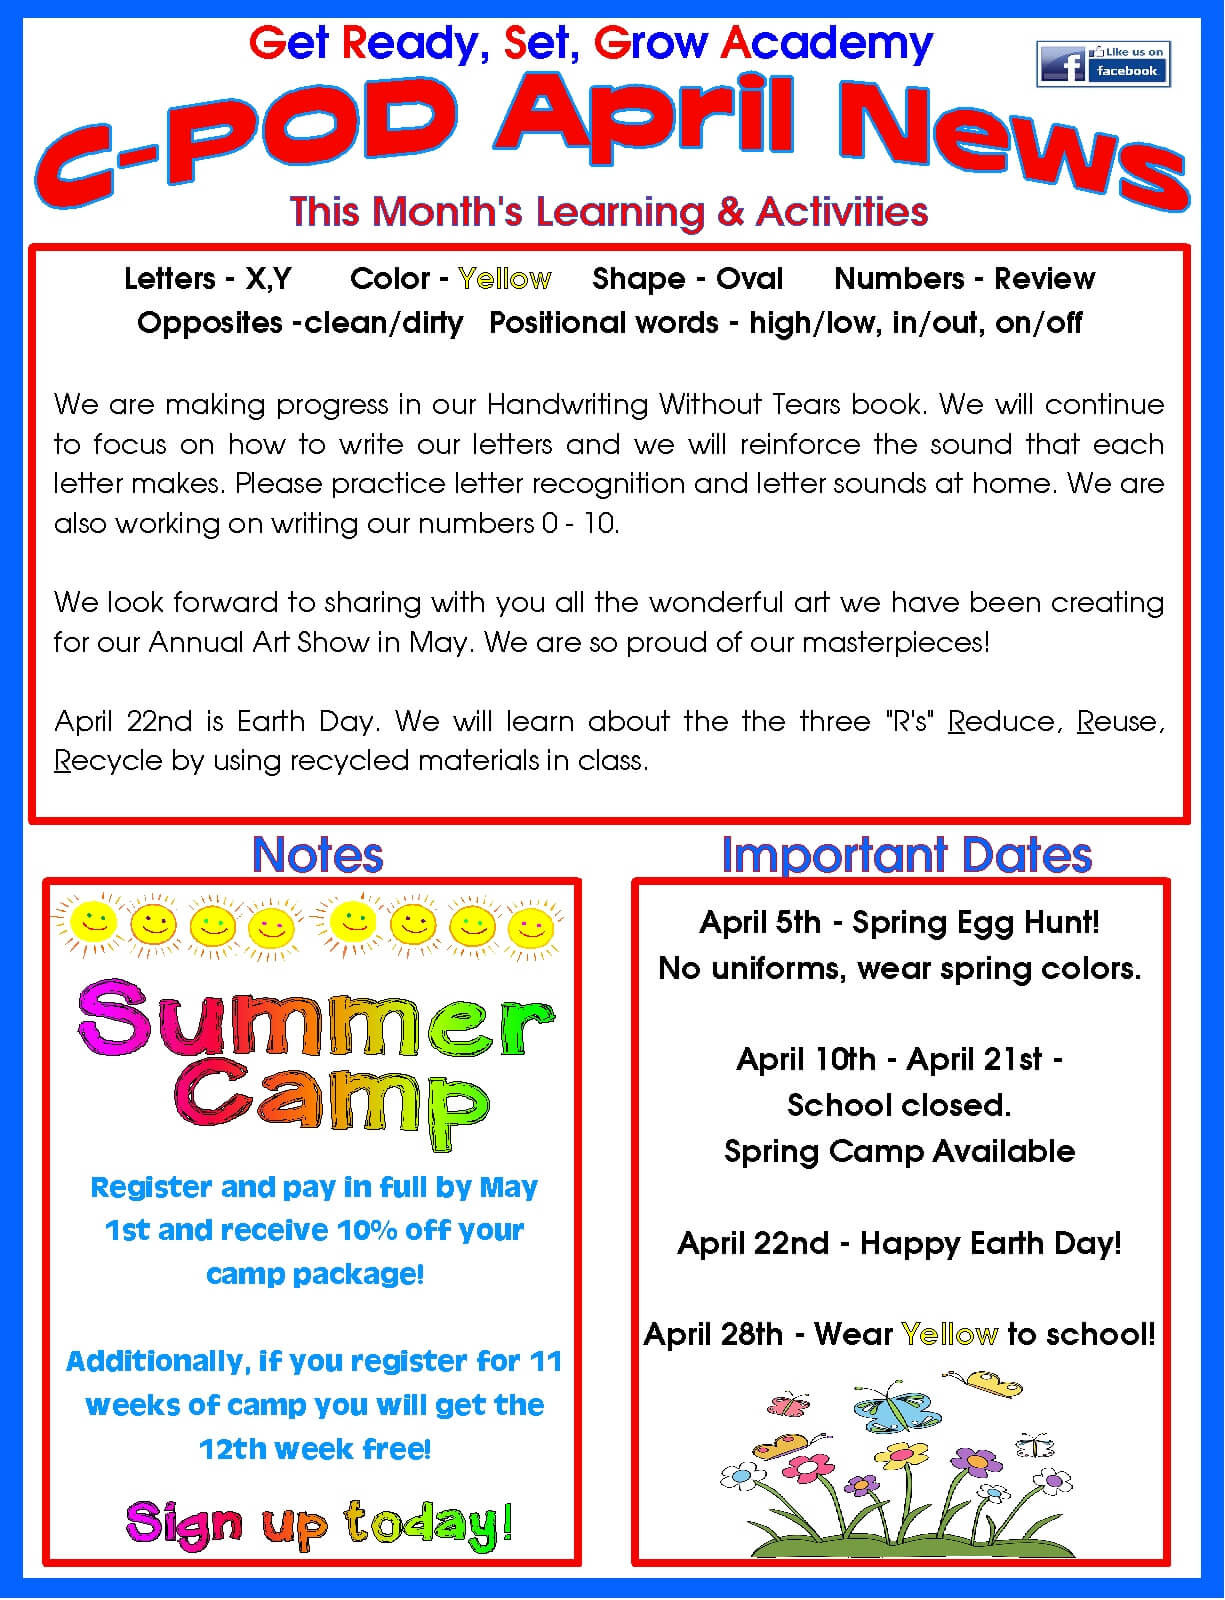 Delray Beach Day Care Facility Monthly Newsletter